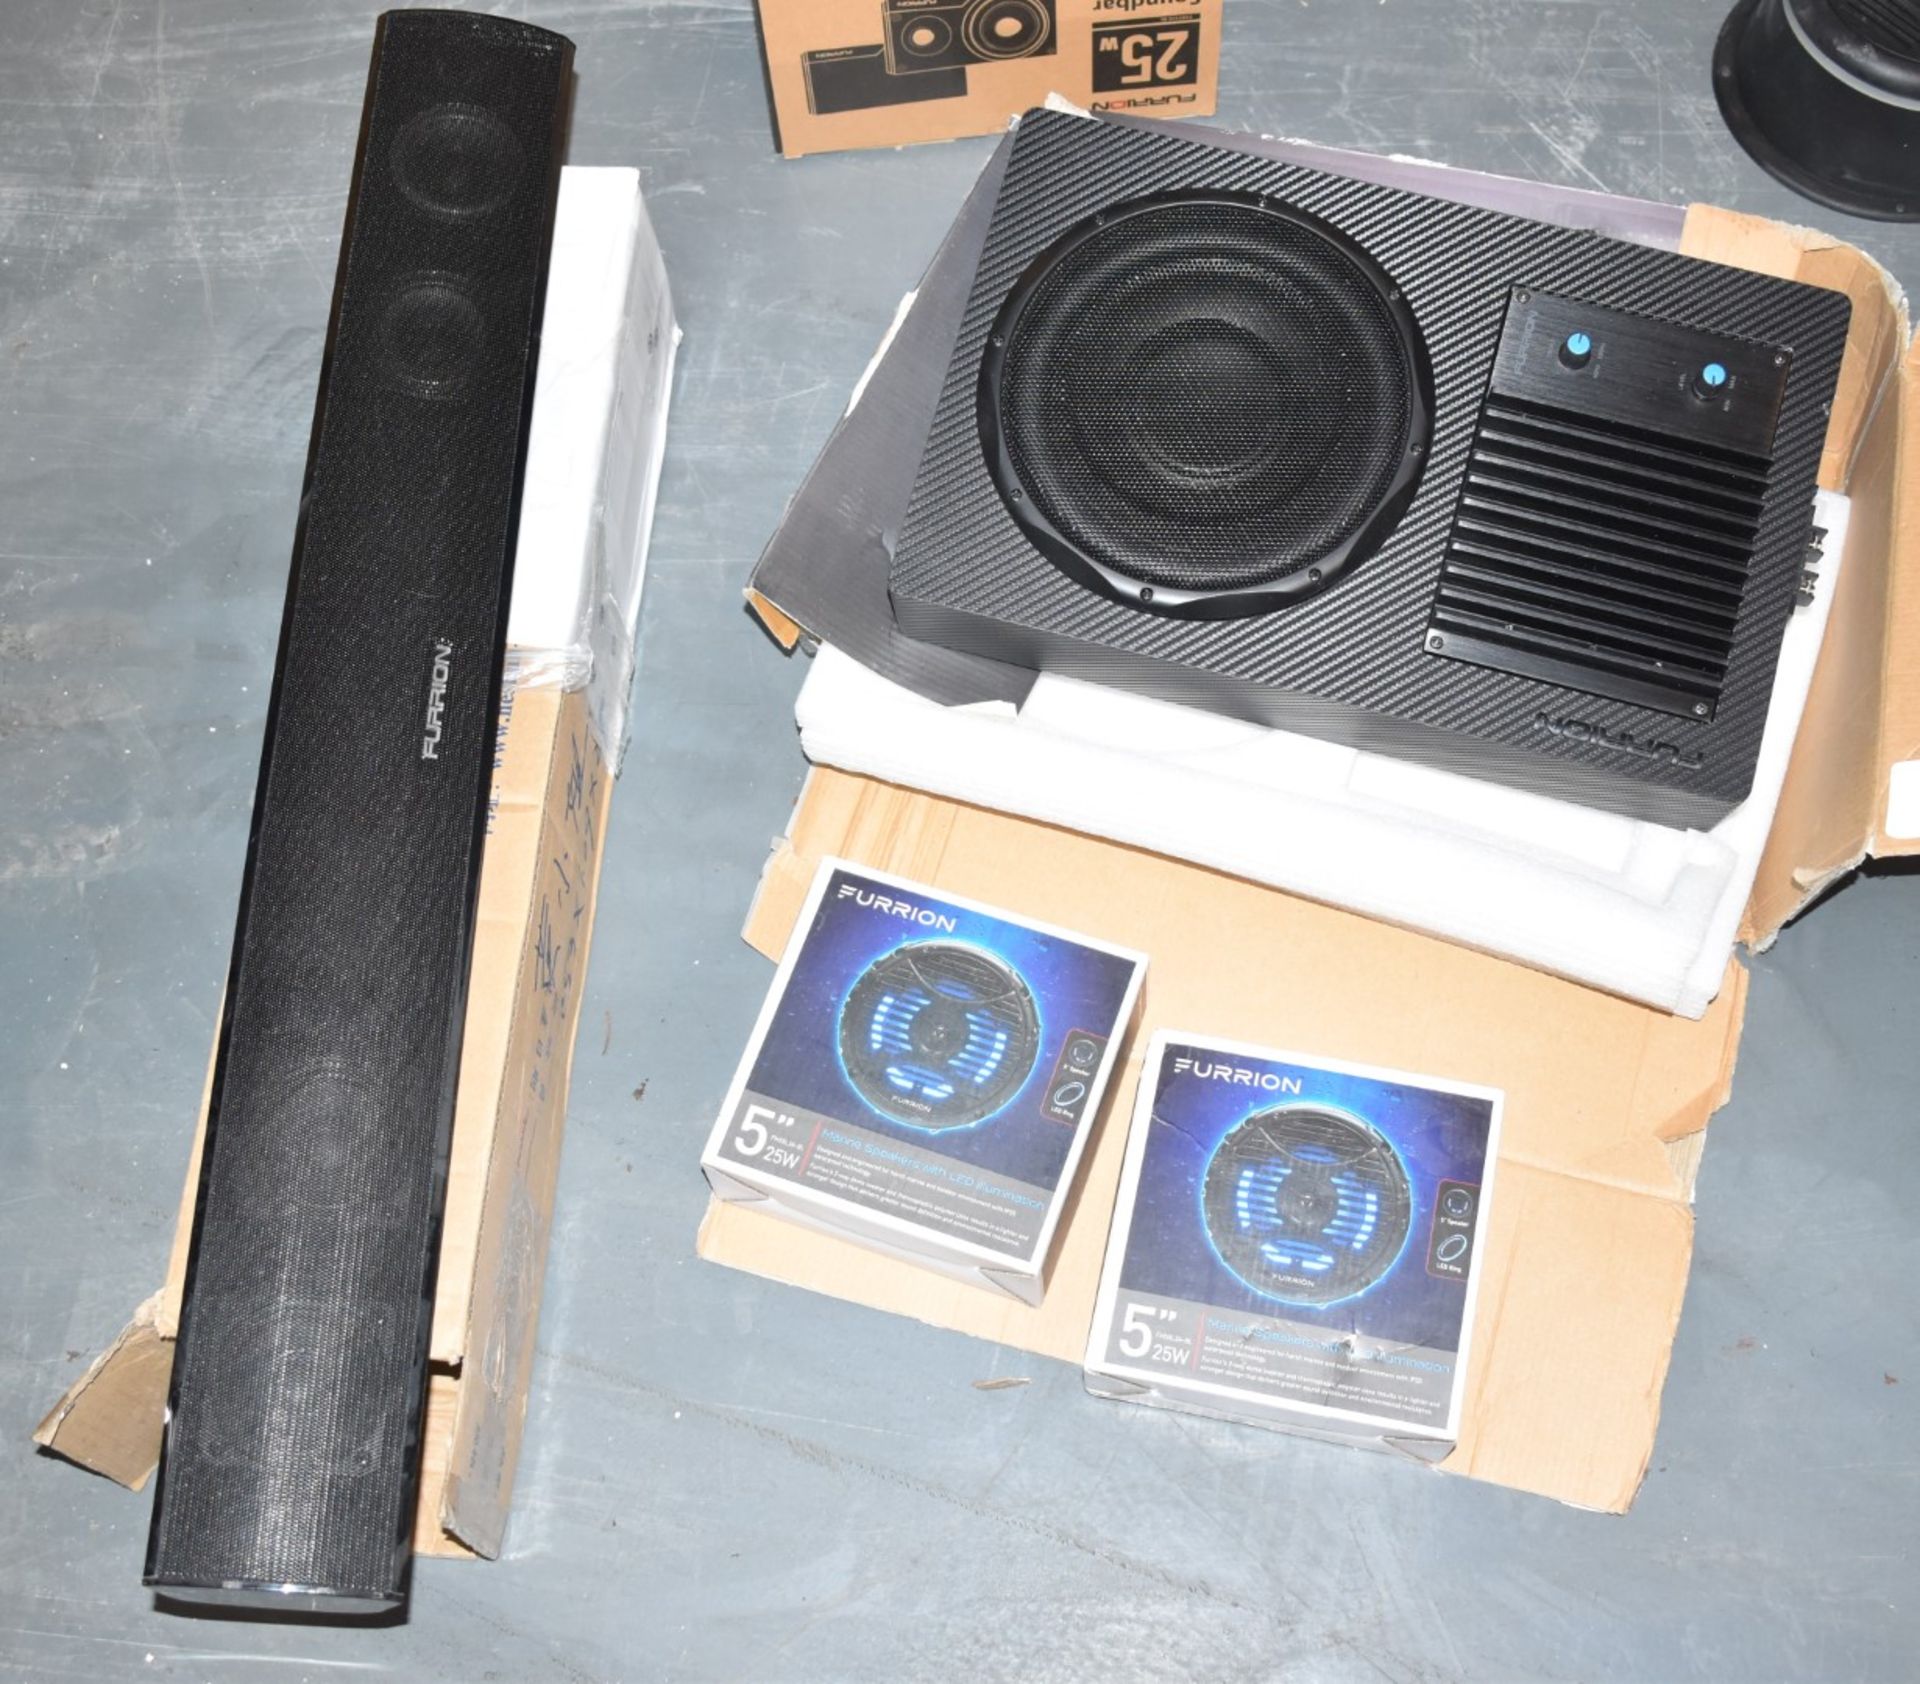 Assorted Collection of Furrion Audio Equipment - Includes Subwoofer, Soundbar and Pair of Marine 5